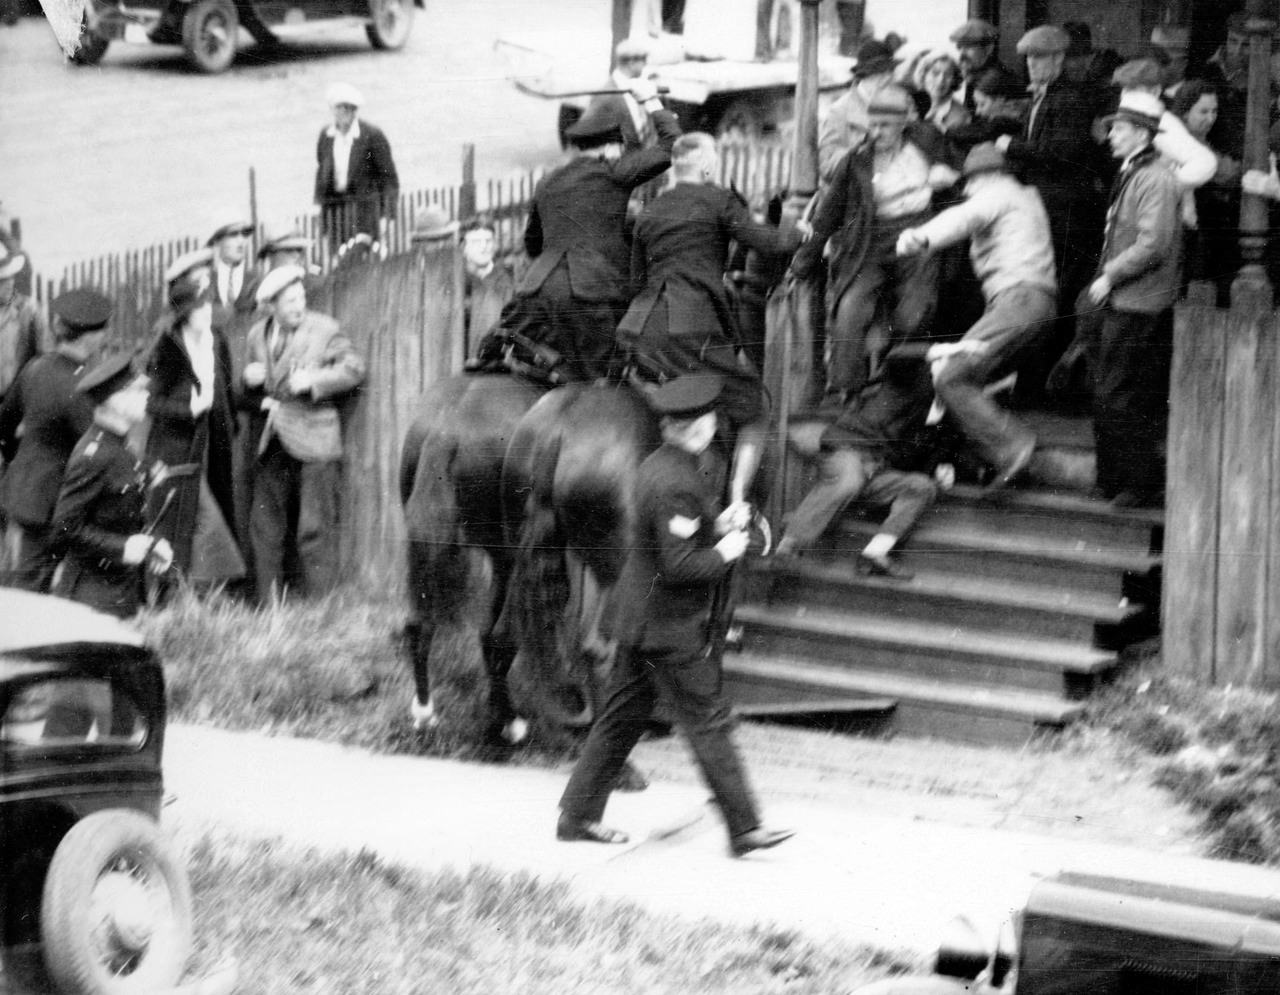 Officers hit striking workers during the Battle of Ballantyne Pier in Vancouver, Canada in 1935. During the Great Depression, dock workers began to strike to push for better wages and more support from the government who owned the dock. These workers already had a history of conflicts with the government in Vancouver, with at least 2 other major strikes in the previous 20 years. Vancouver city officials responded to the growing number of potential protesters by increasing their police force. They refused to allow them to actually protest or carry signs, and tried to encourage them to disperse. Instead, about 1,000 men marched together preparing to demonstrate in front of the pier. The Vancouver police setup an ambush for them. They attacked the crowd with clubs, using mounted police to surround and trap some of the workers, which this picture shows. This attempted strike completely failed, with 60 people being wounded in the battle, none being policemen. Another 24 workers were arrested, and the mayor of Vancouver eliminated relief payments to all known workers participating in the demonstration. The fight for worker rights continued, but would take another 10 years before they would be allowed to form an independent union and get the protections they deserved from the city government.